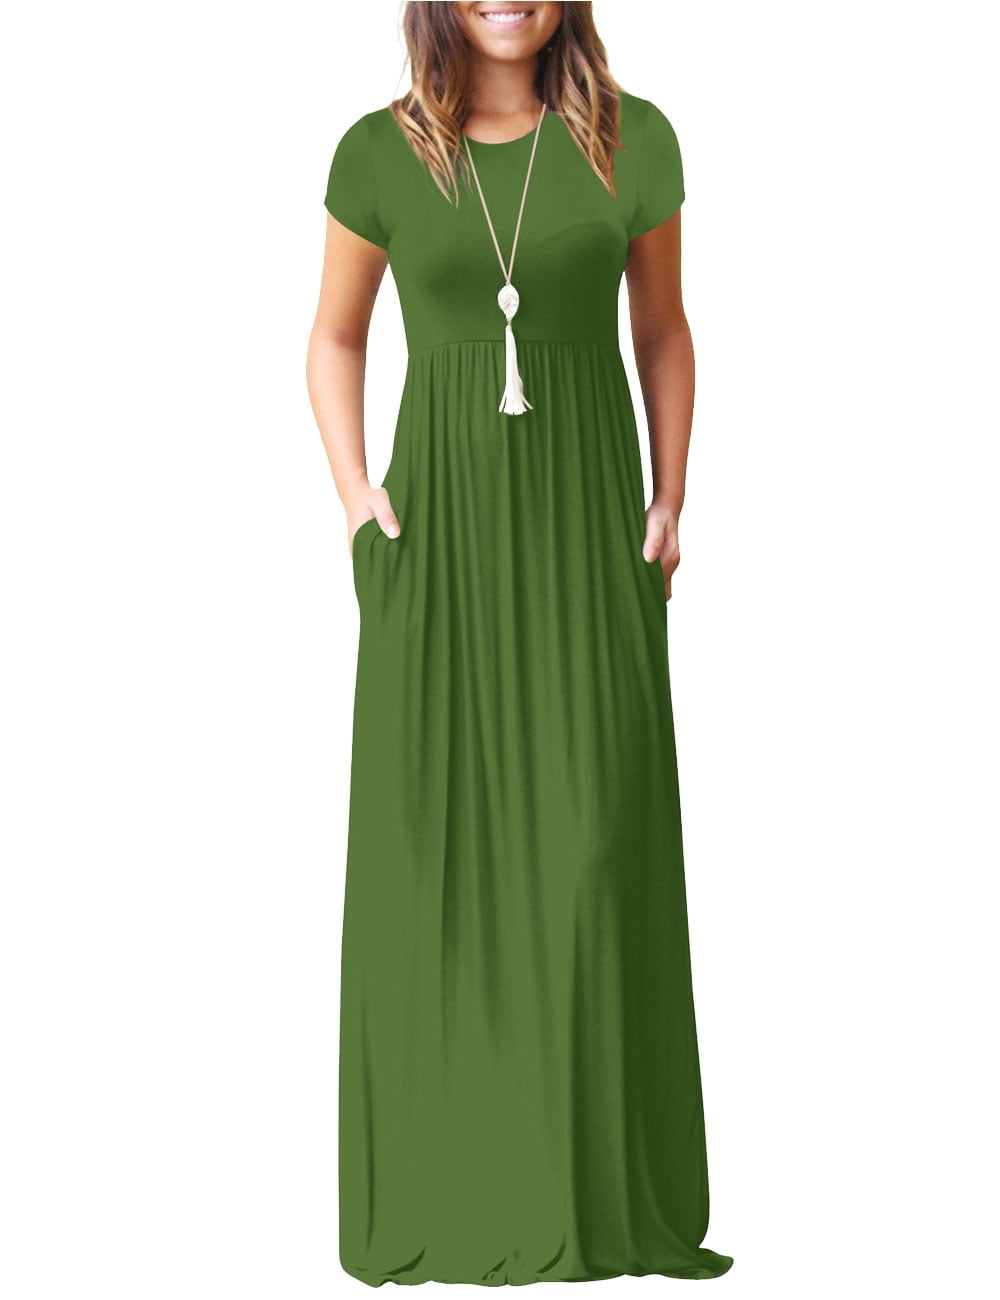 Dress for Womens Summer 4th of July Casual Solid Color Maxi Dresses ...